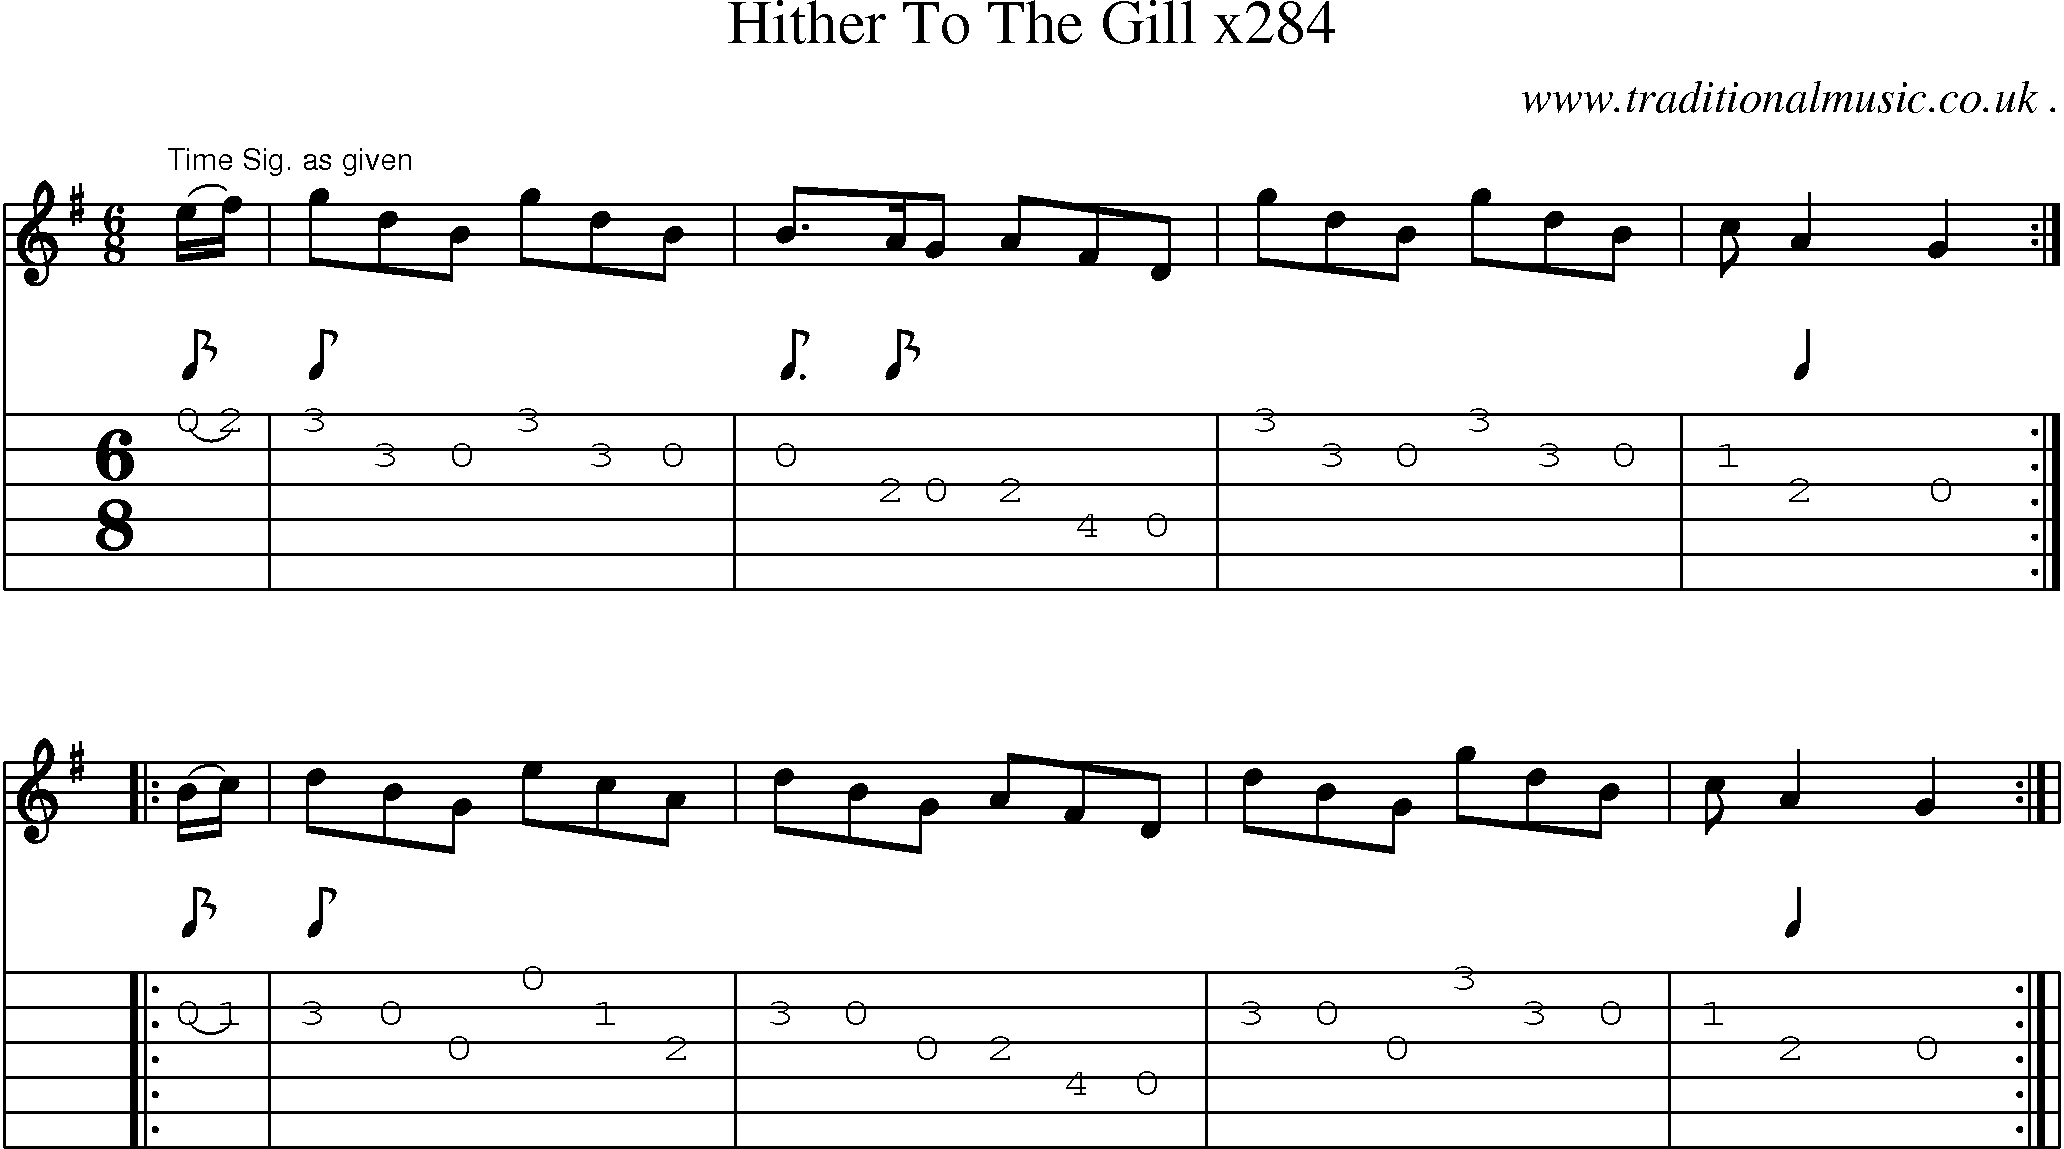 Sheet-Music and Guitar Tabs for Hither To The Gill X284